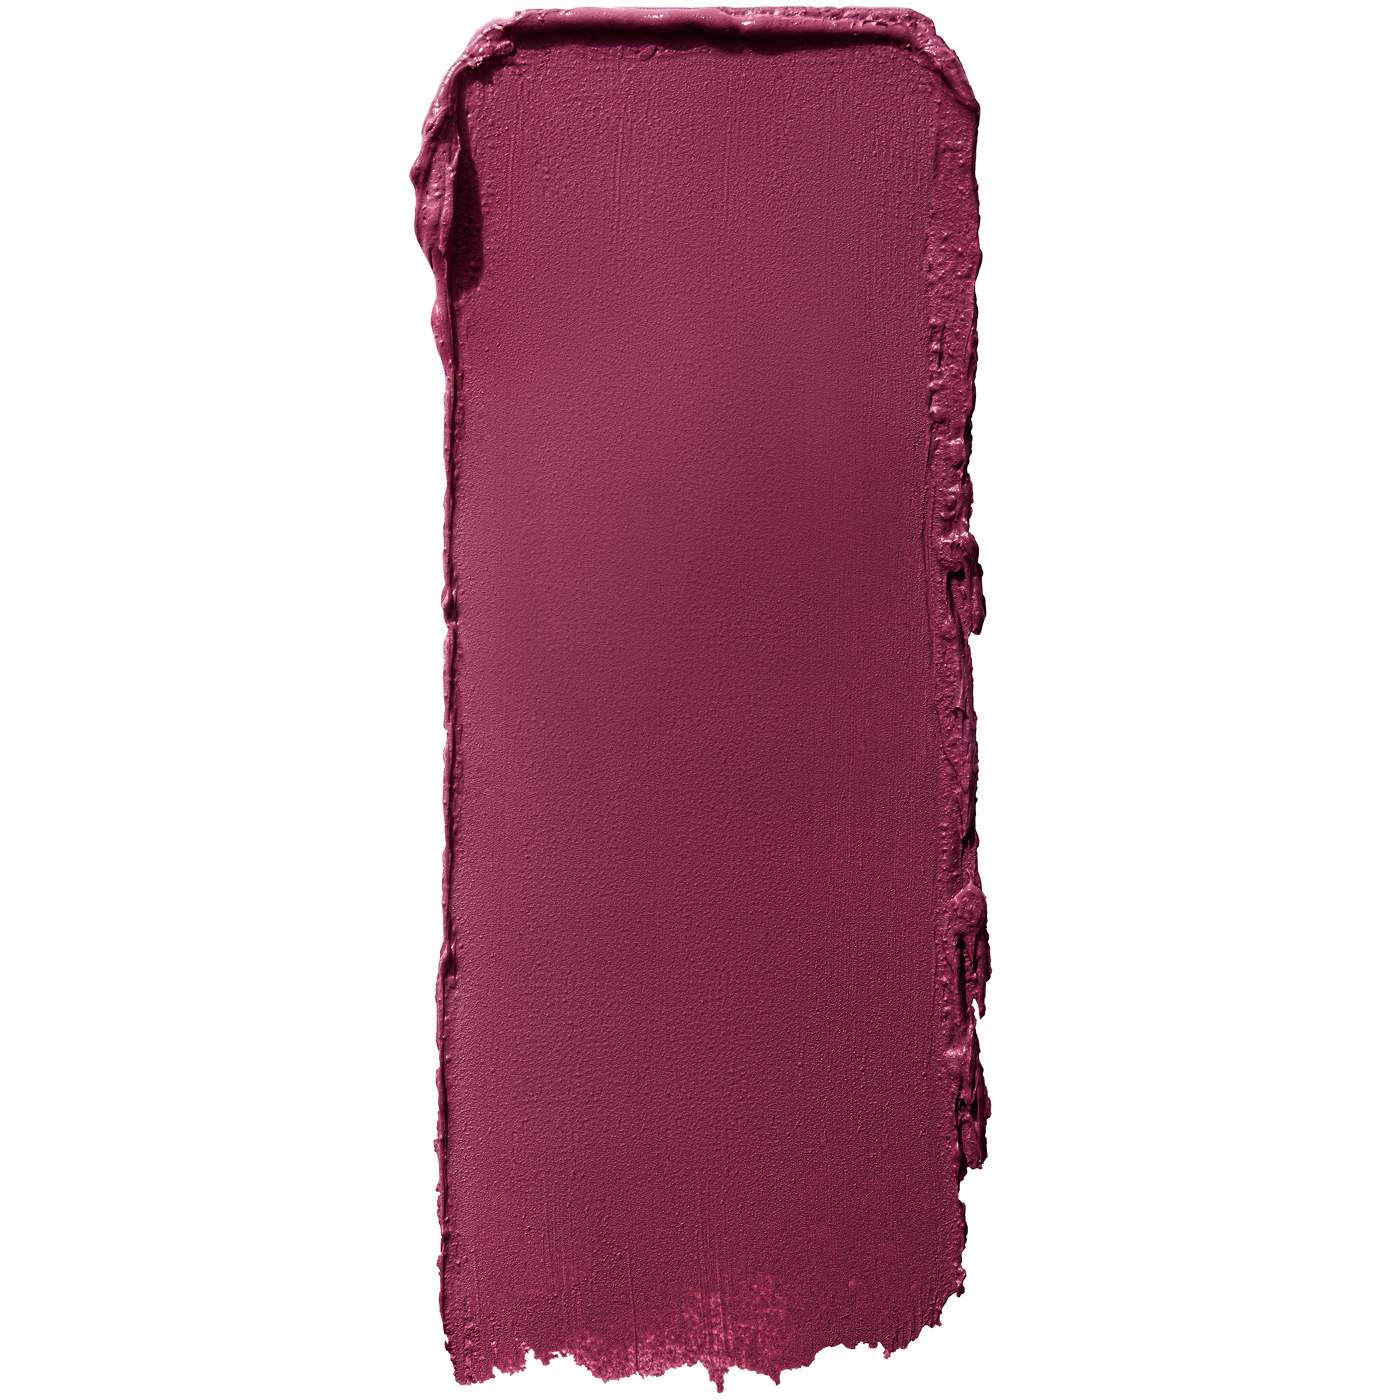 Maybelline Super Stay Ink Crayon Lipstick - Accept A Dare; image 3 of 5